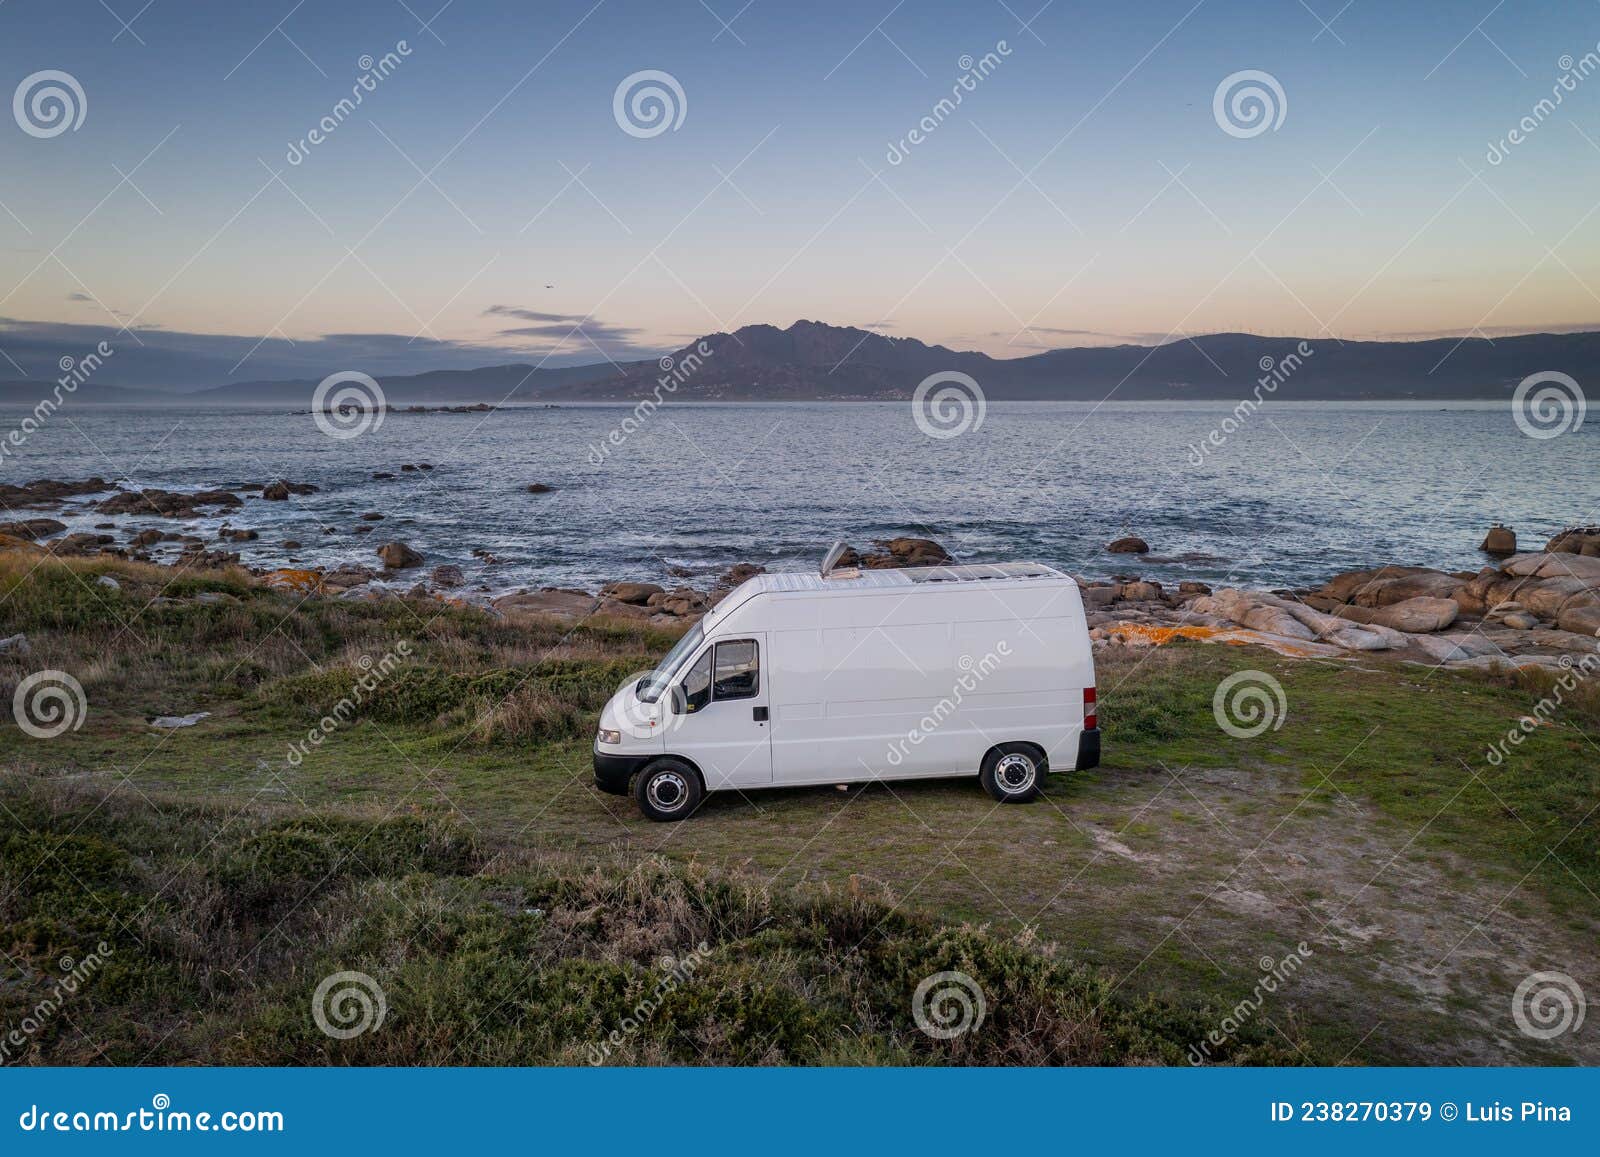 camper van motorhome with solar panels drone aerial view on a sea landscape with mountains living van life in galiza, spain